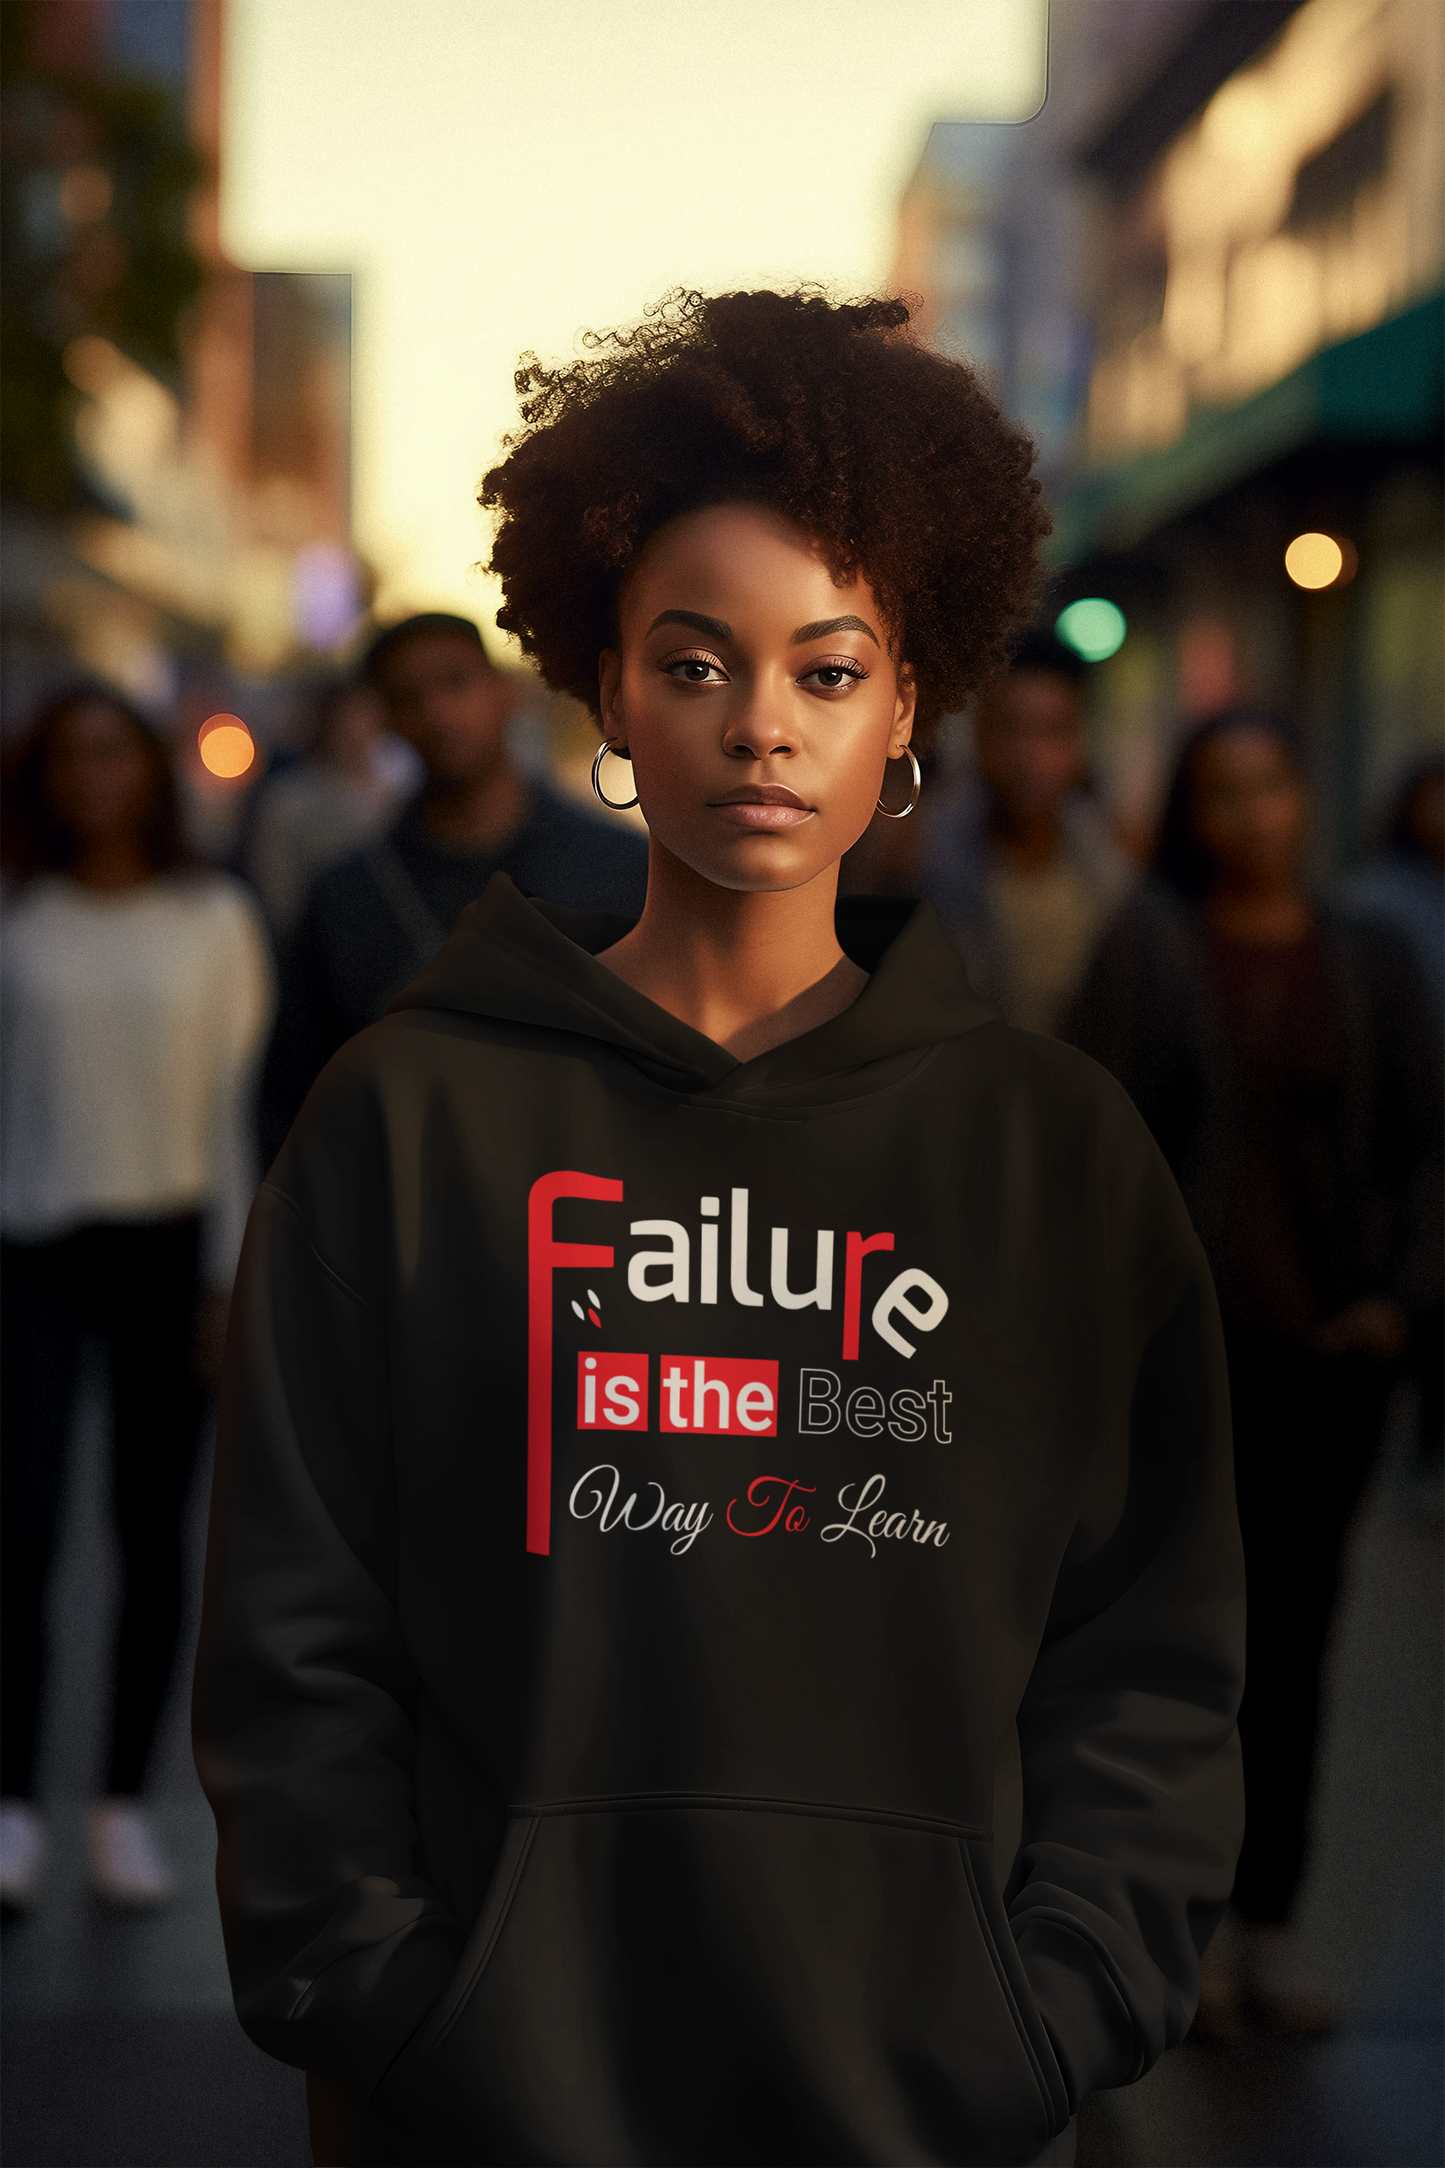 Motivational Shirt - Failure is the Best Way To Learn, Red & White